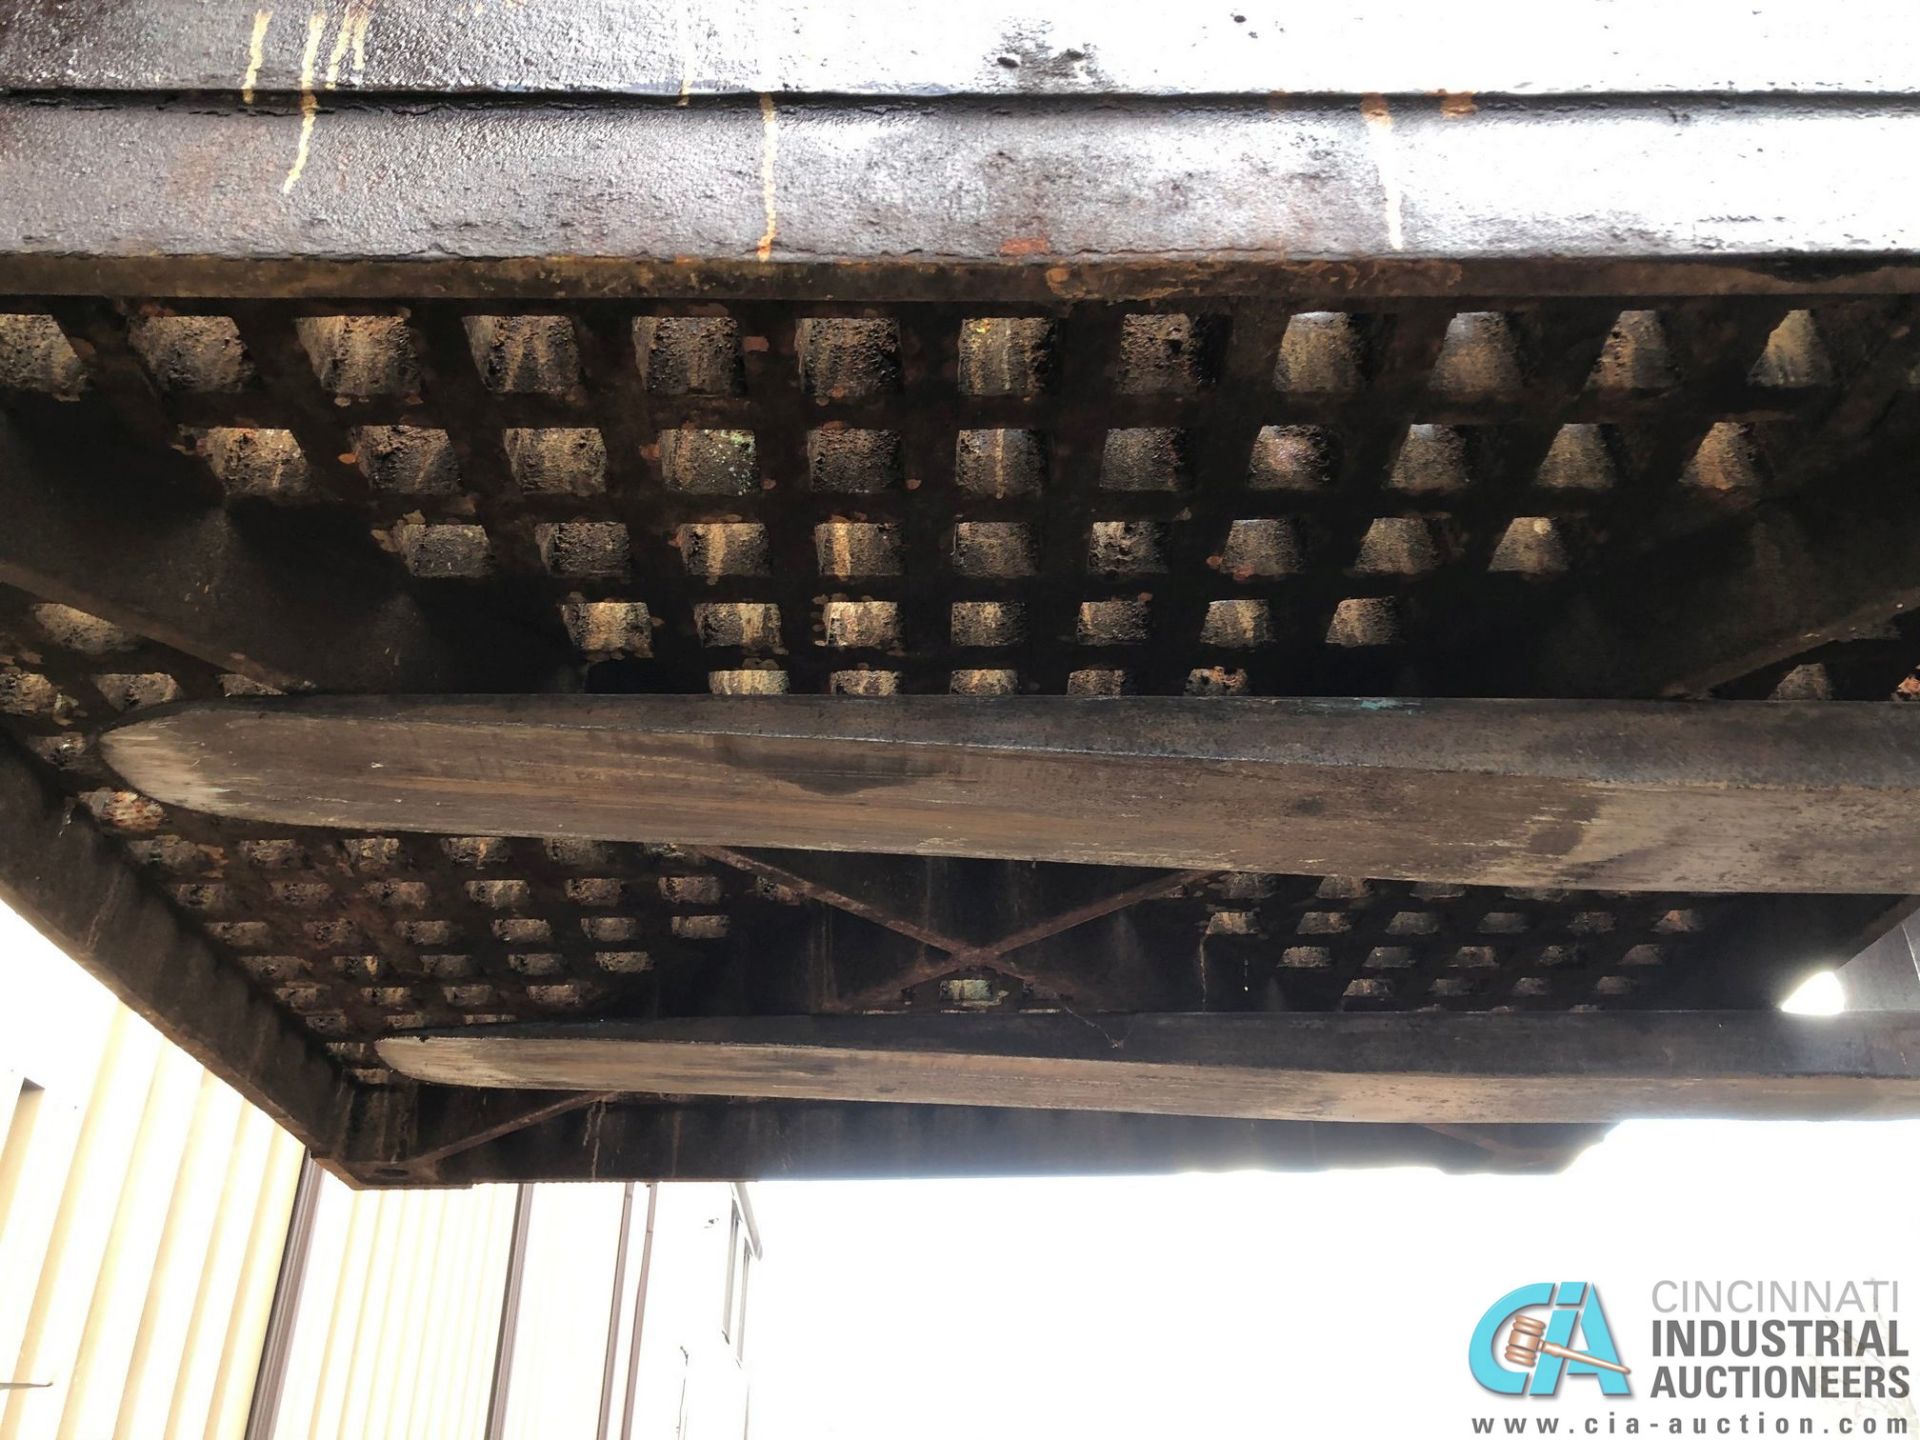 60" X 60" ACORN WELDING PLATE **ONLY (1) PLATE PER LOT**LOCATED AT 1400 OAK ST., TOLEDO, OHIO** - Image 3 of 3